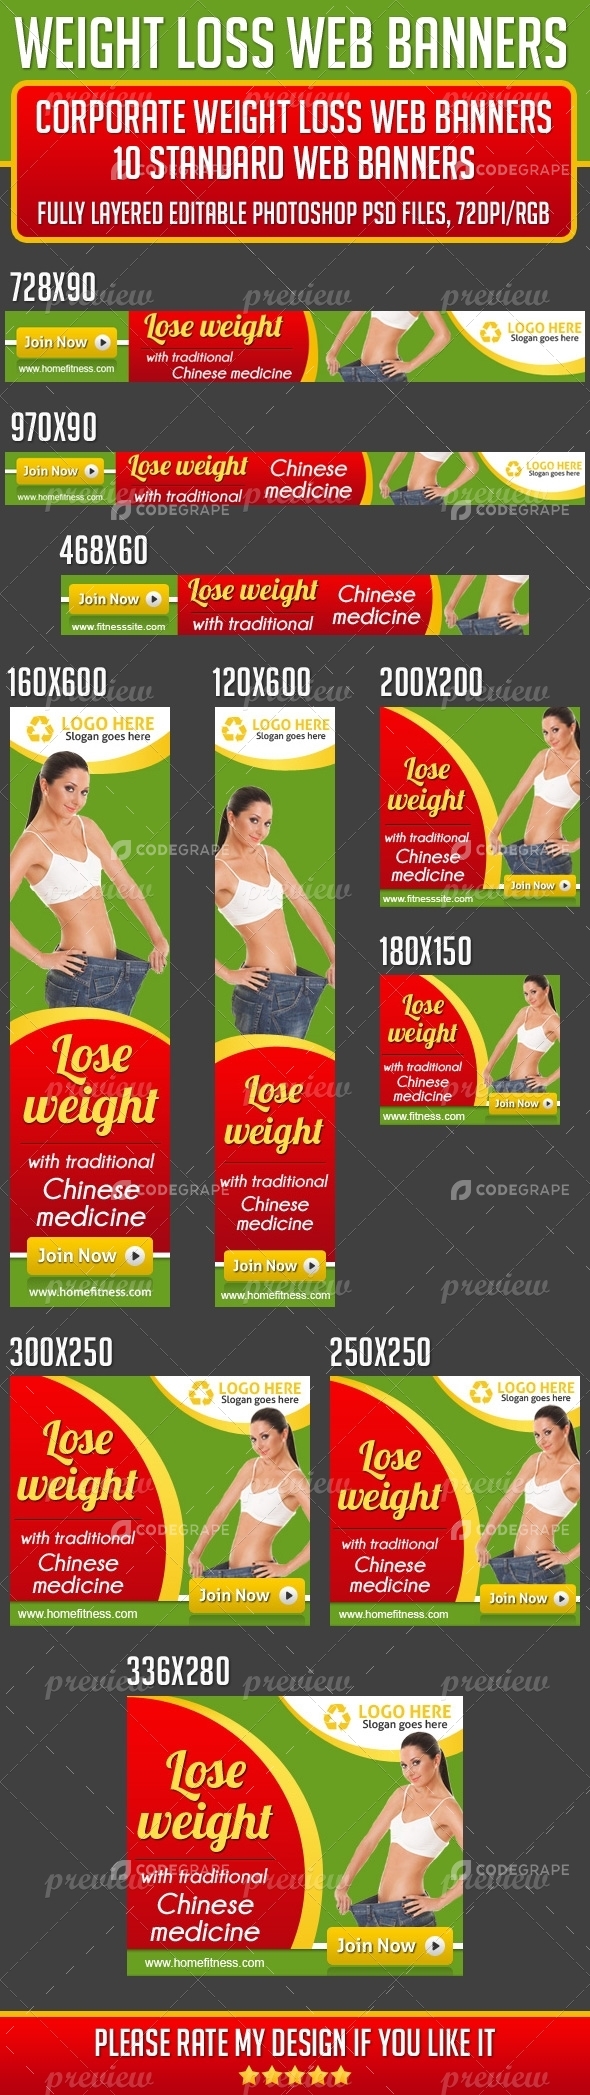 Weight Loss Web Banners